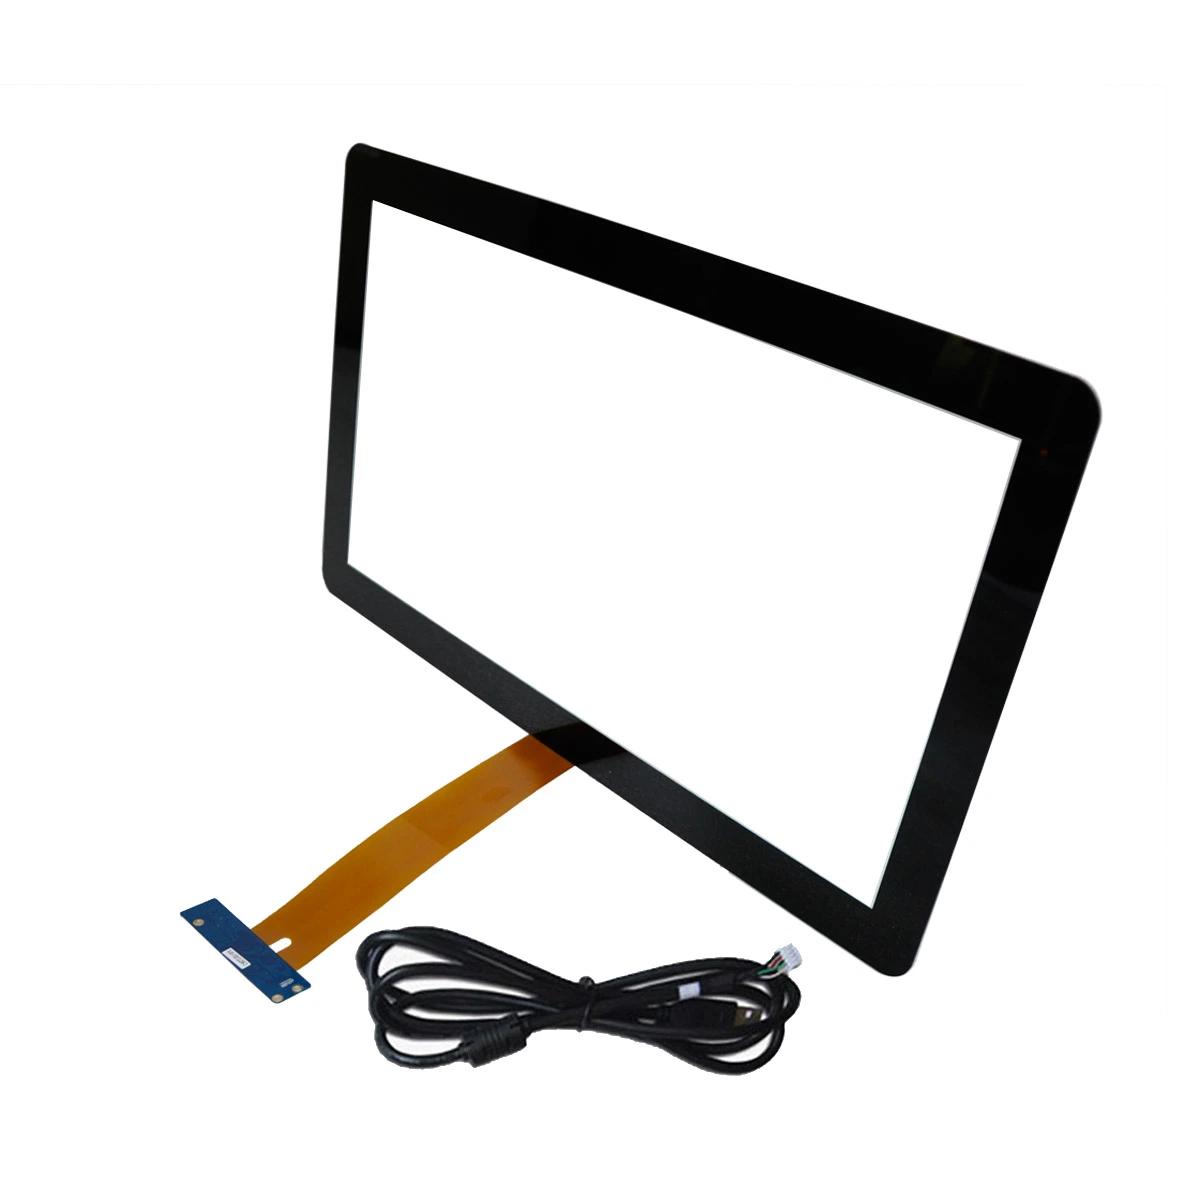 15.6 Inch 10 Point Multi Touch Capacitive Touch Screen High Sensitive Multi Touch Panel